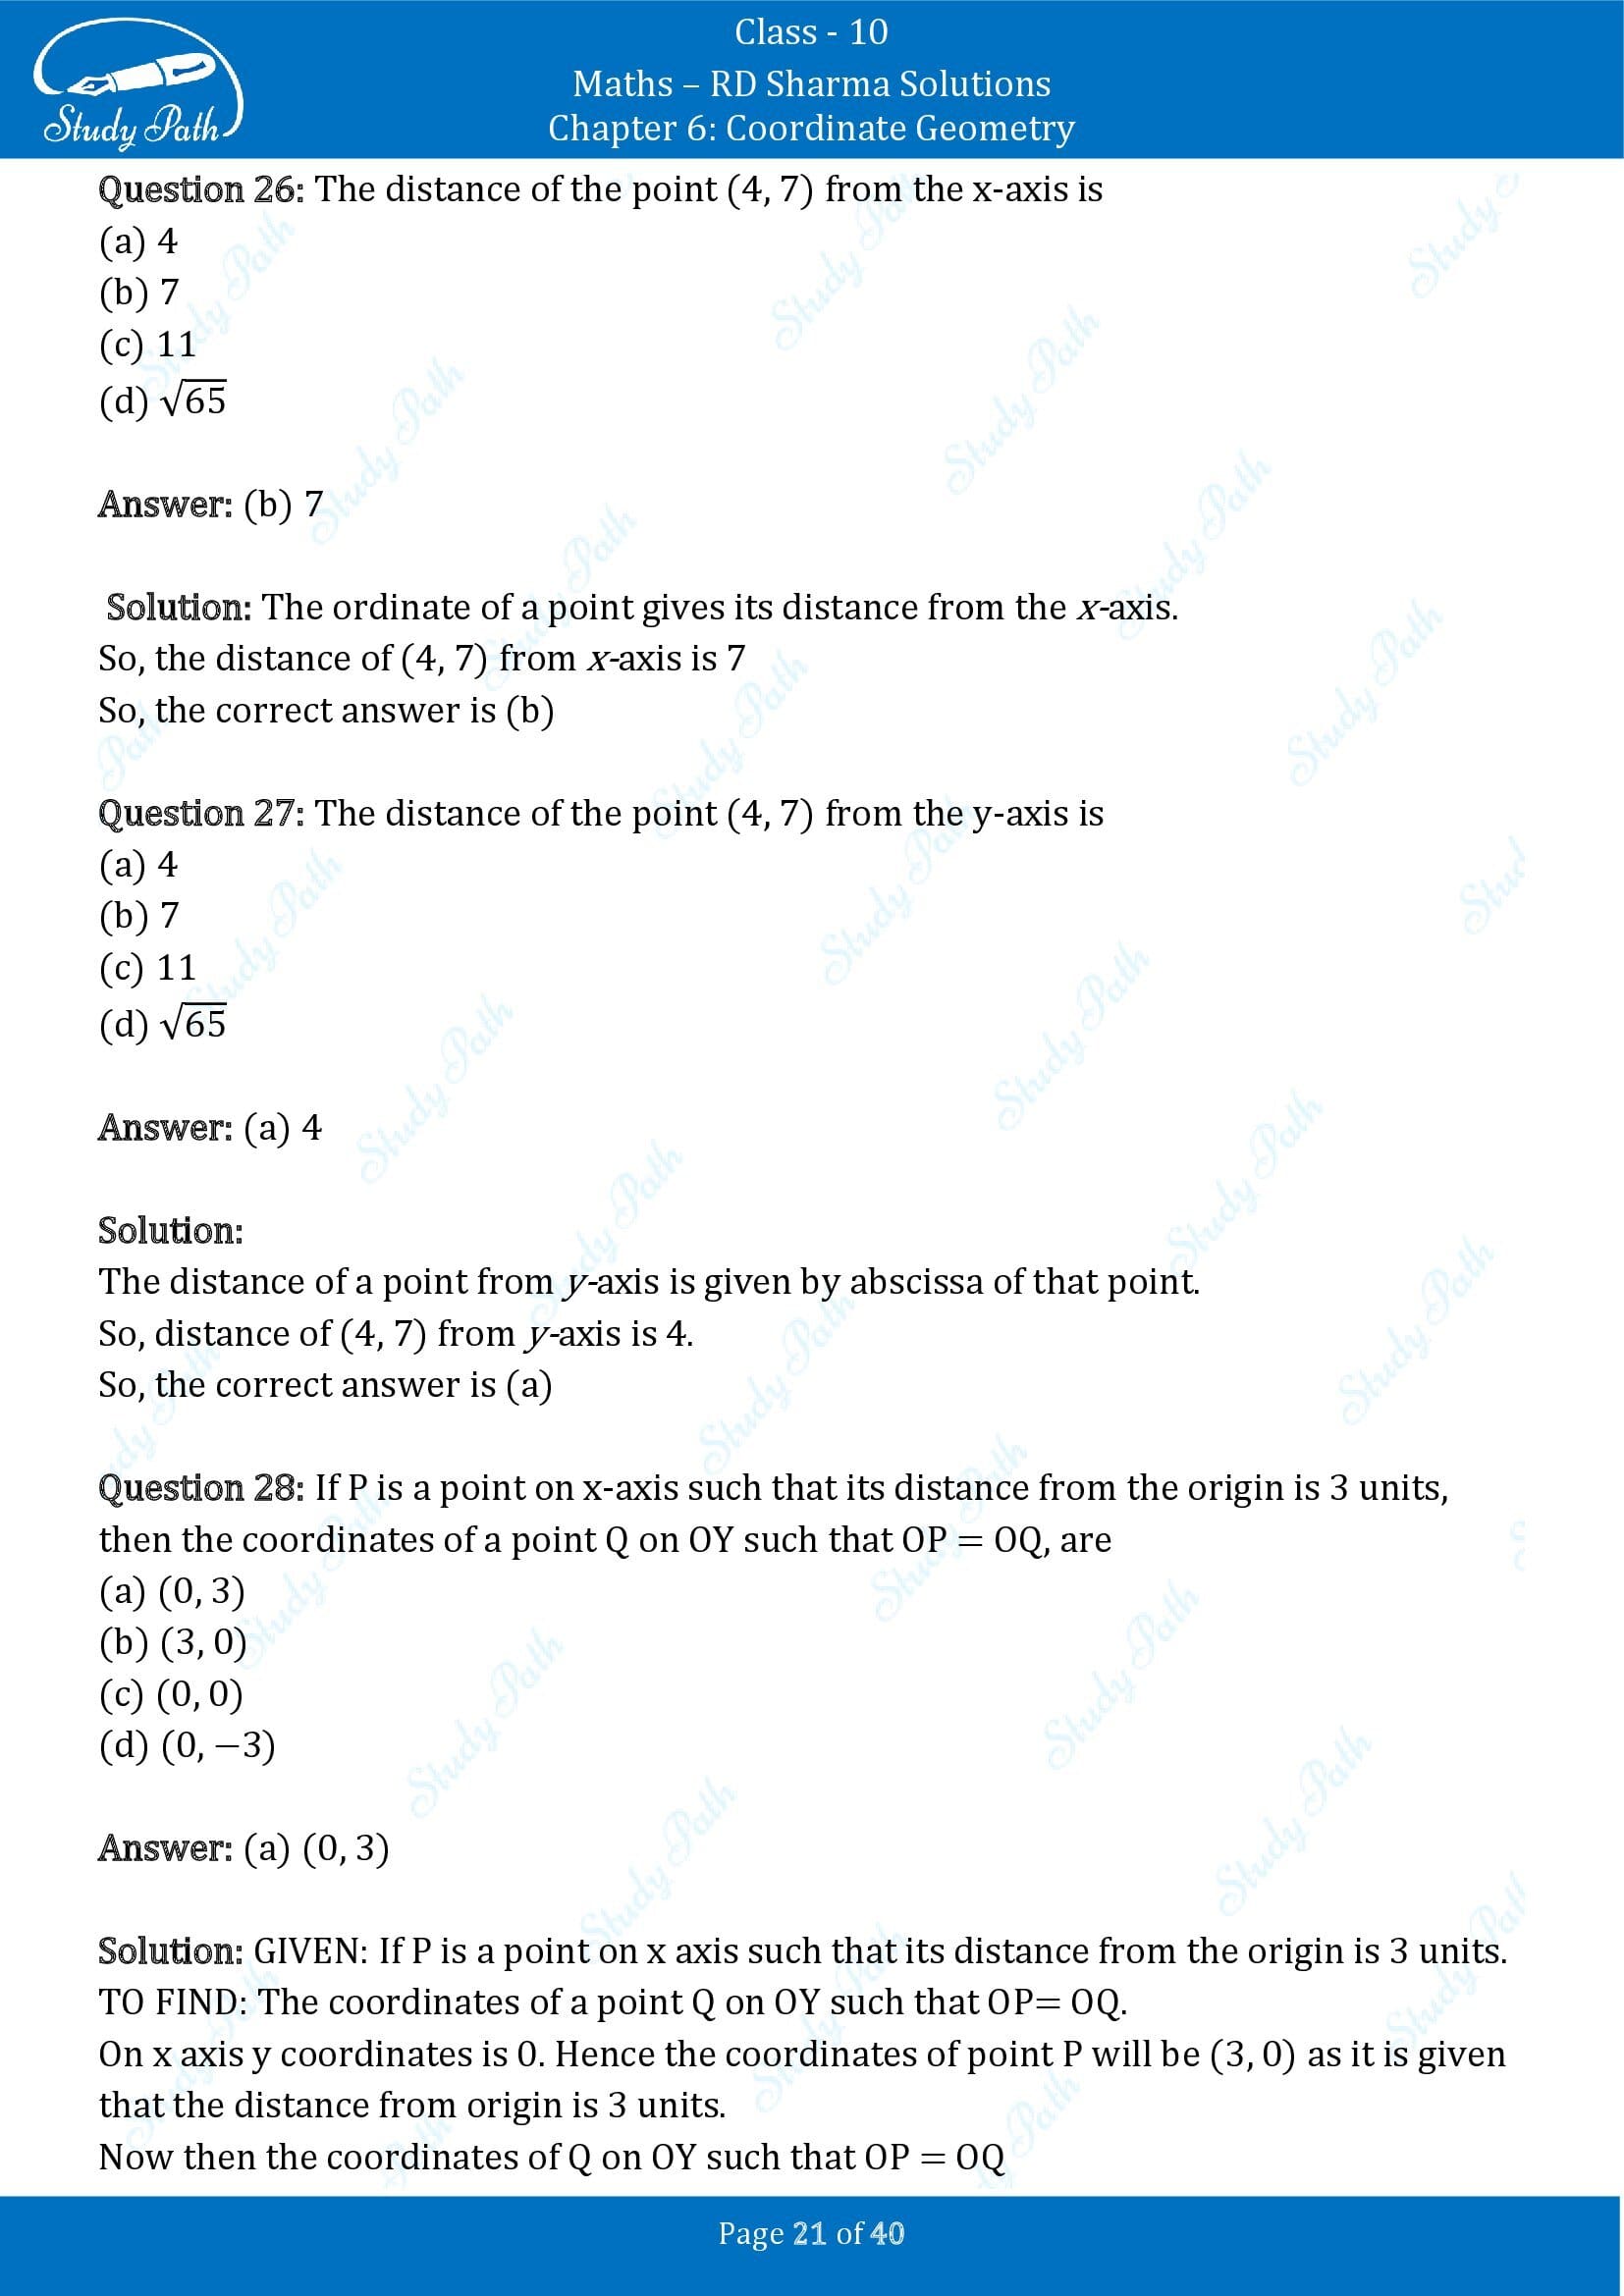 RD Sharma Solutions Class 10 Chapter 6 Coordinate Geometry Multiple Choice Question MCQs 00021